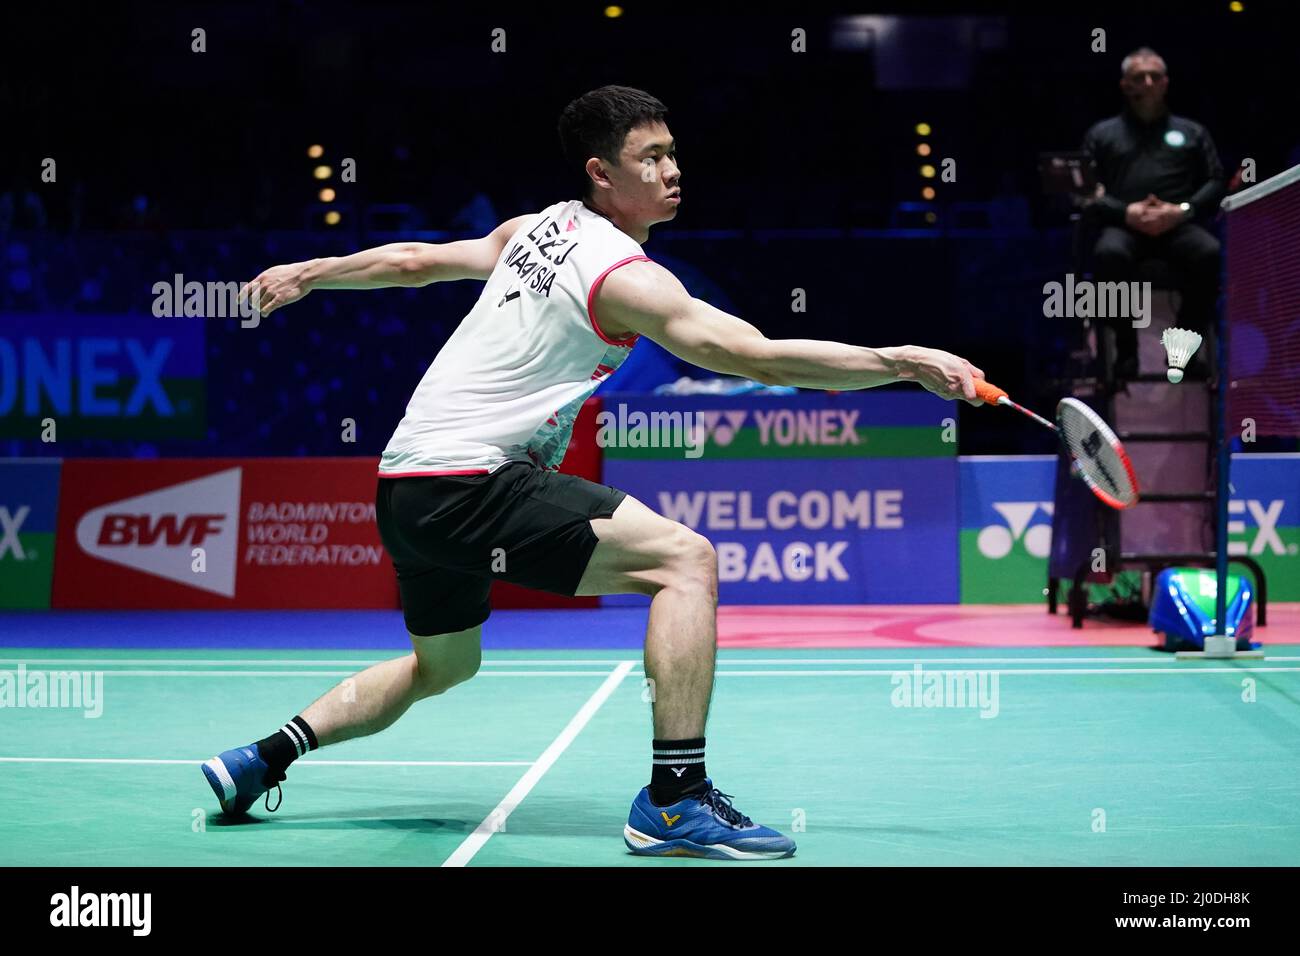 Malaysias Lee Zii Jia in action against Japans Kento Momota during day three of the YONEX All England Open Badminton Championships at the Utilita Arena Birmingham